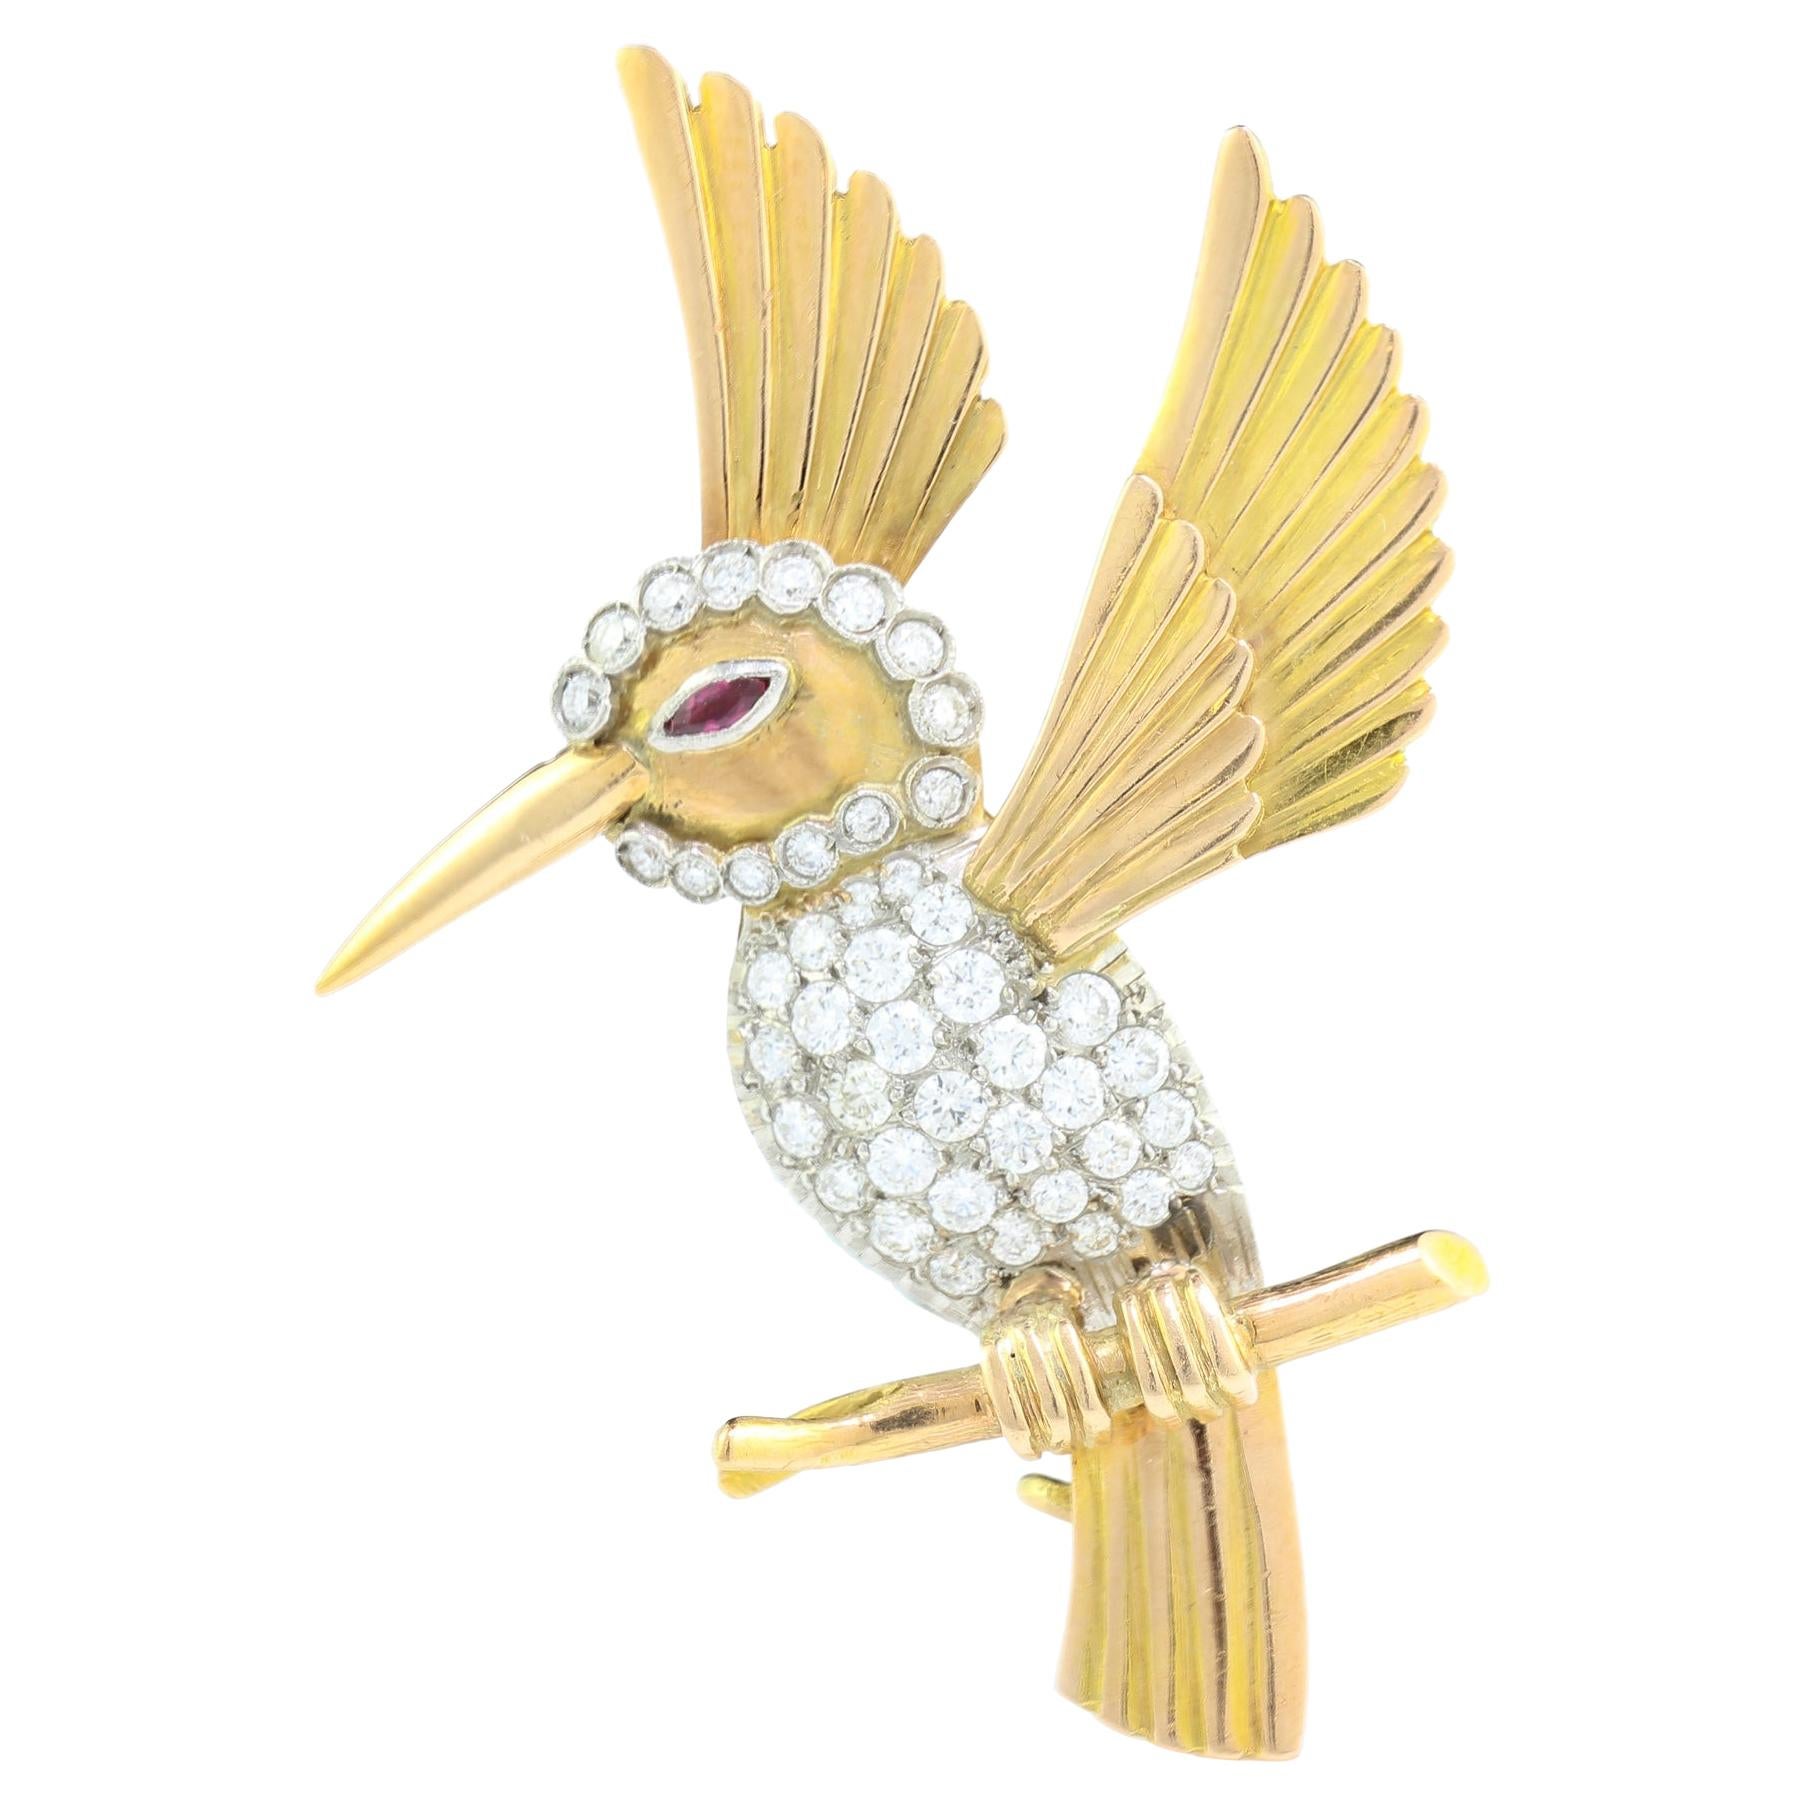 18kt Yellow Gold Hummingbird Brooch with Ruby Eye and Diamonds